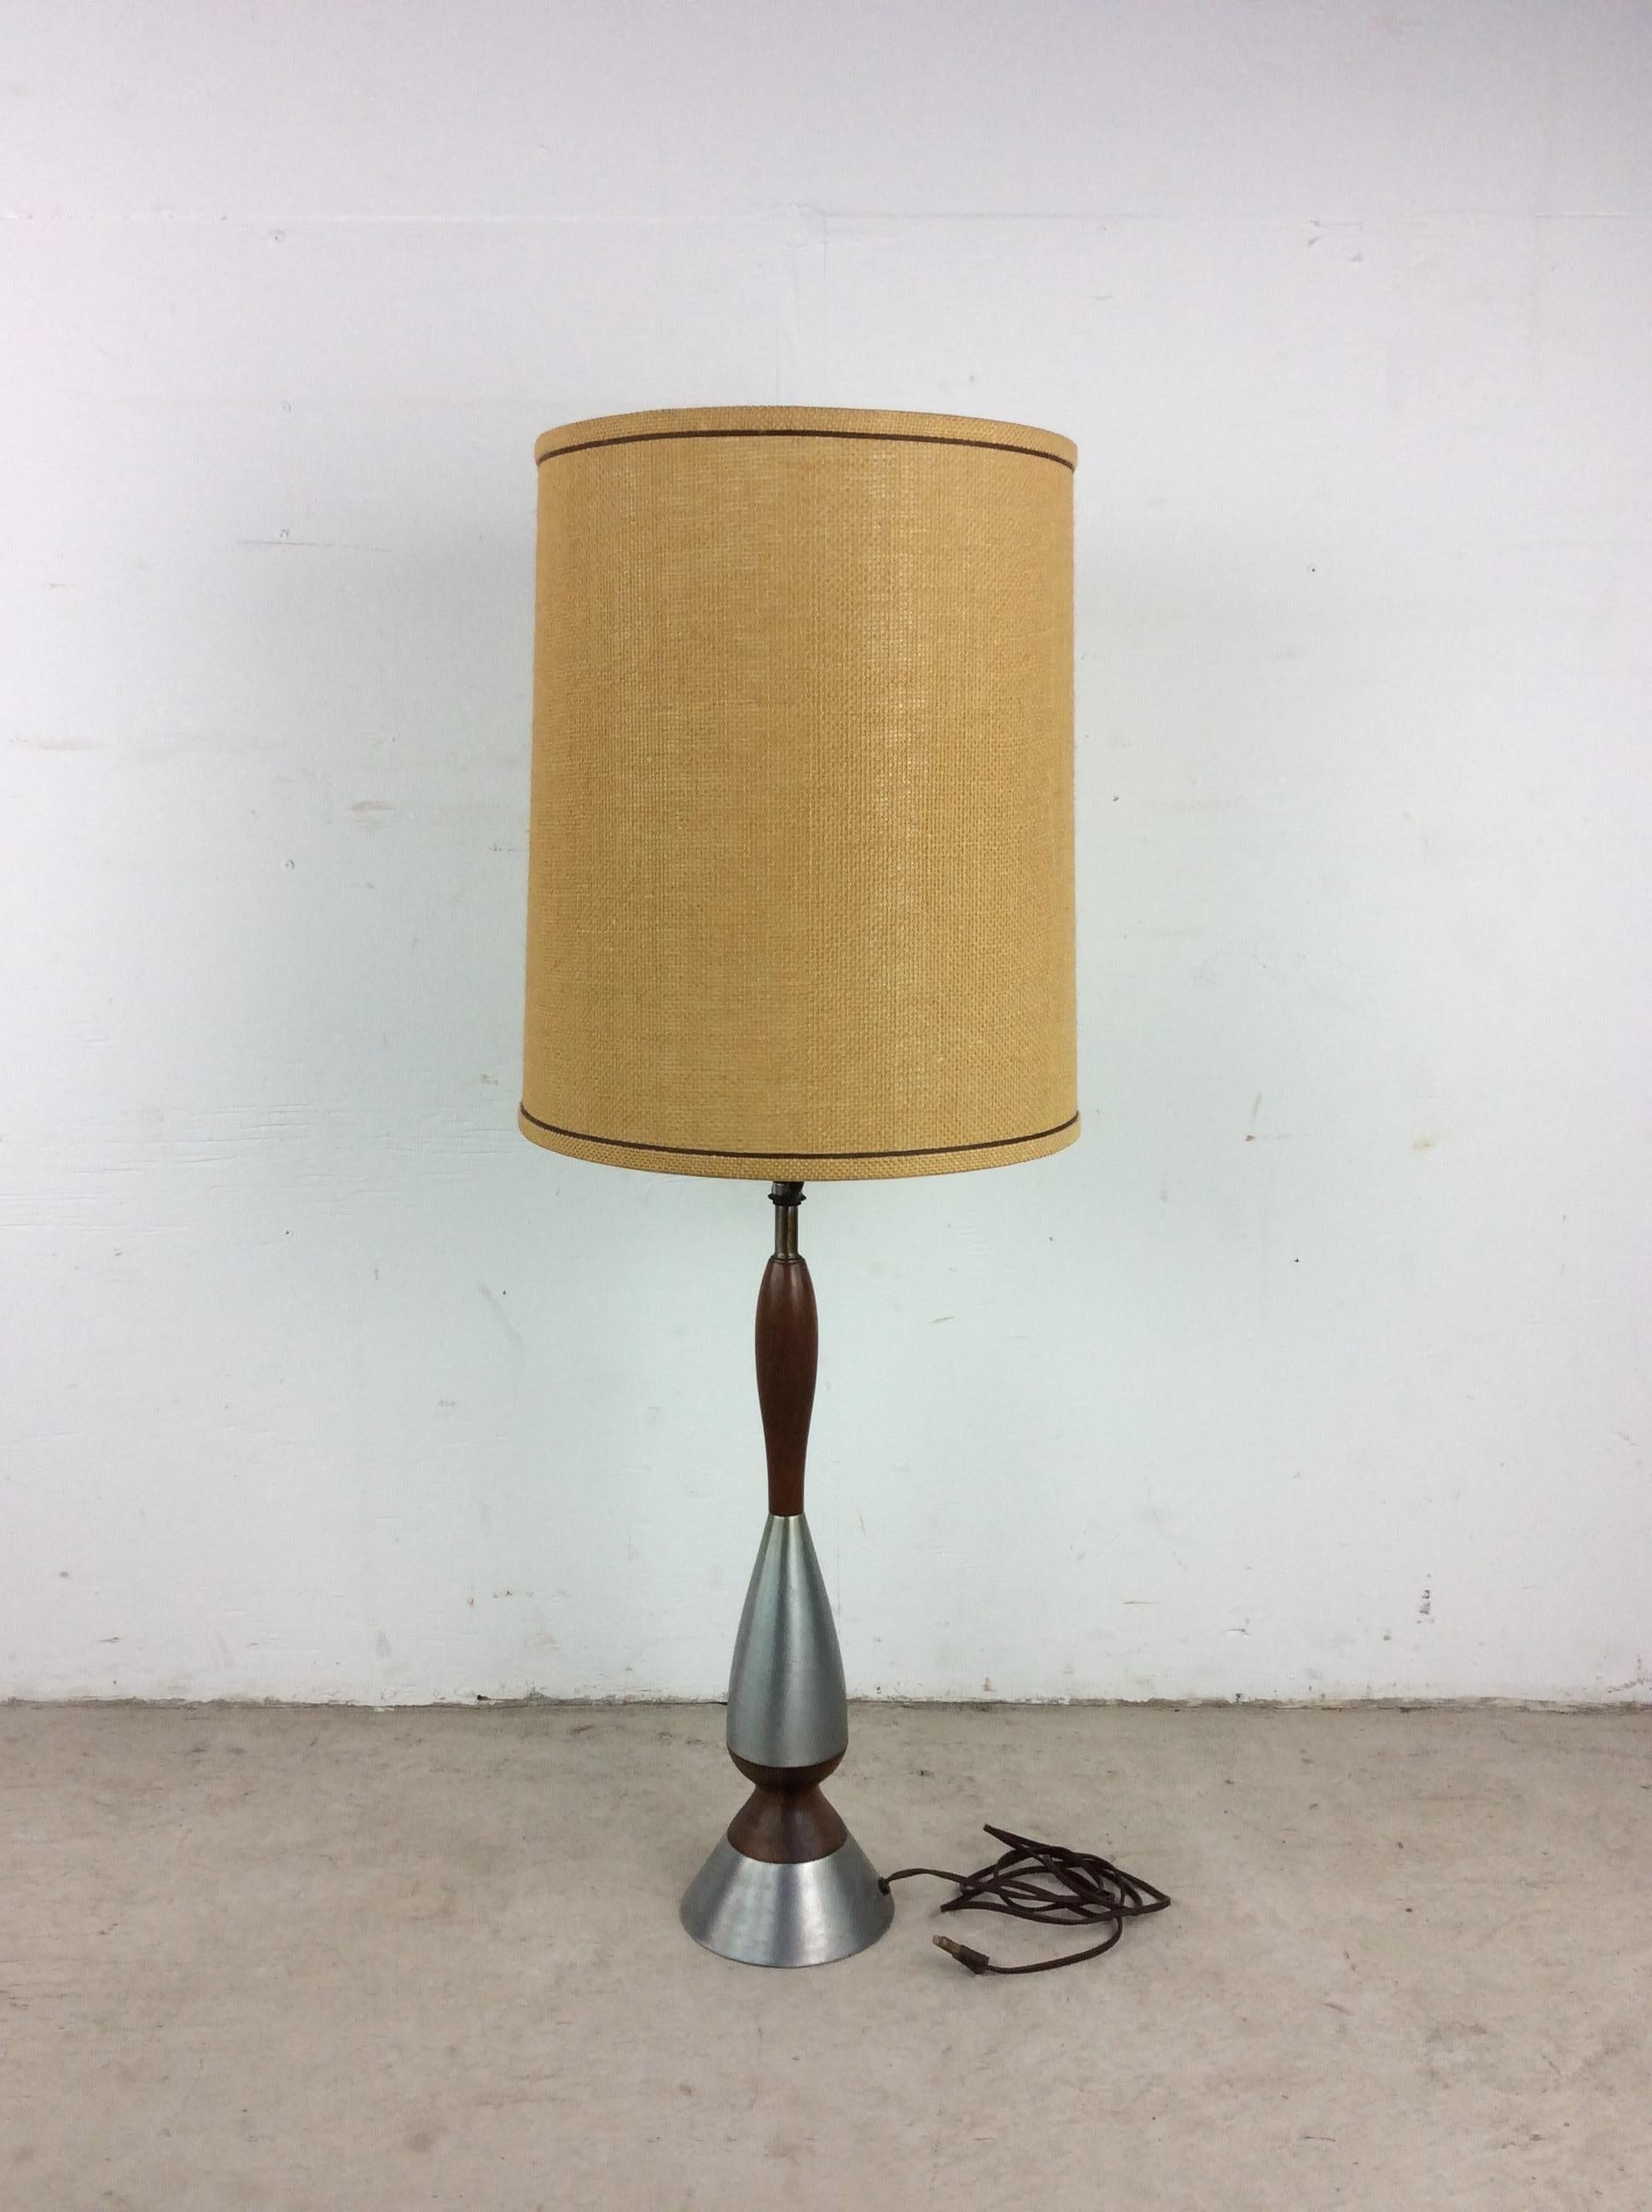 This mid century modern table lamp features chrome & walnut base, original wiring, and vintage barrel shade.

 Dimensions: 13w 13d 39h

Condition: Original wiring works. Vintage shade is in good condition. The chrome & walnut on the base have some